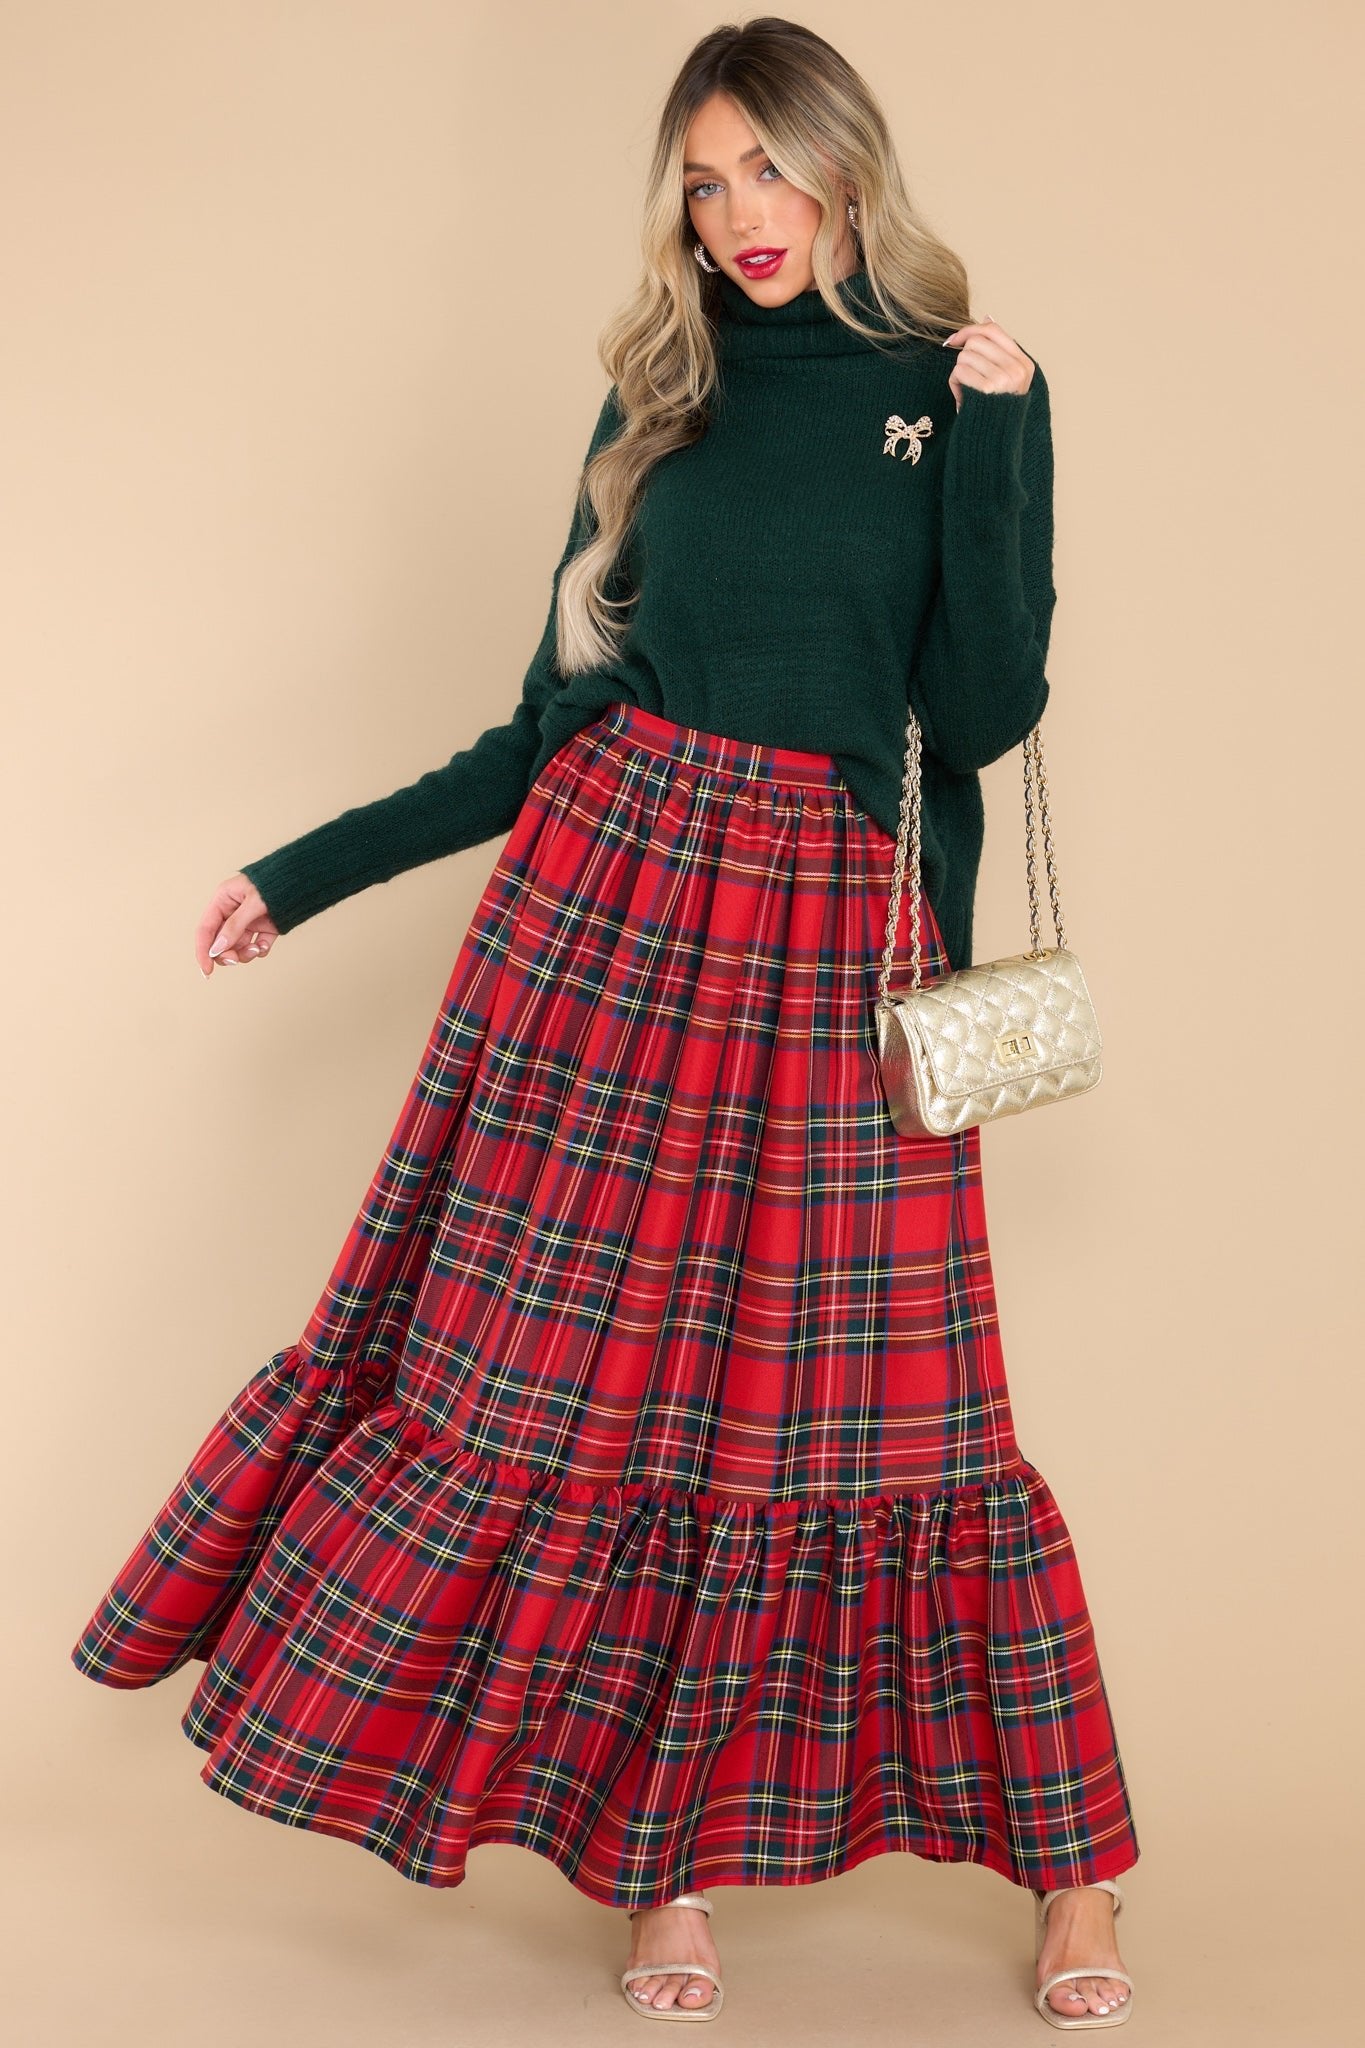 Take Your Time Red Multi Plaid Skirt - Red Dress